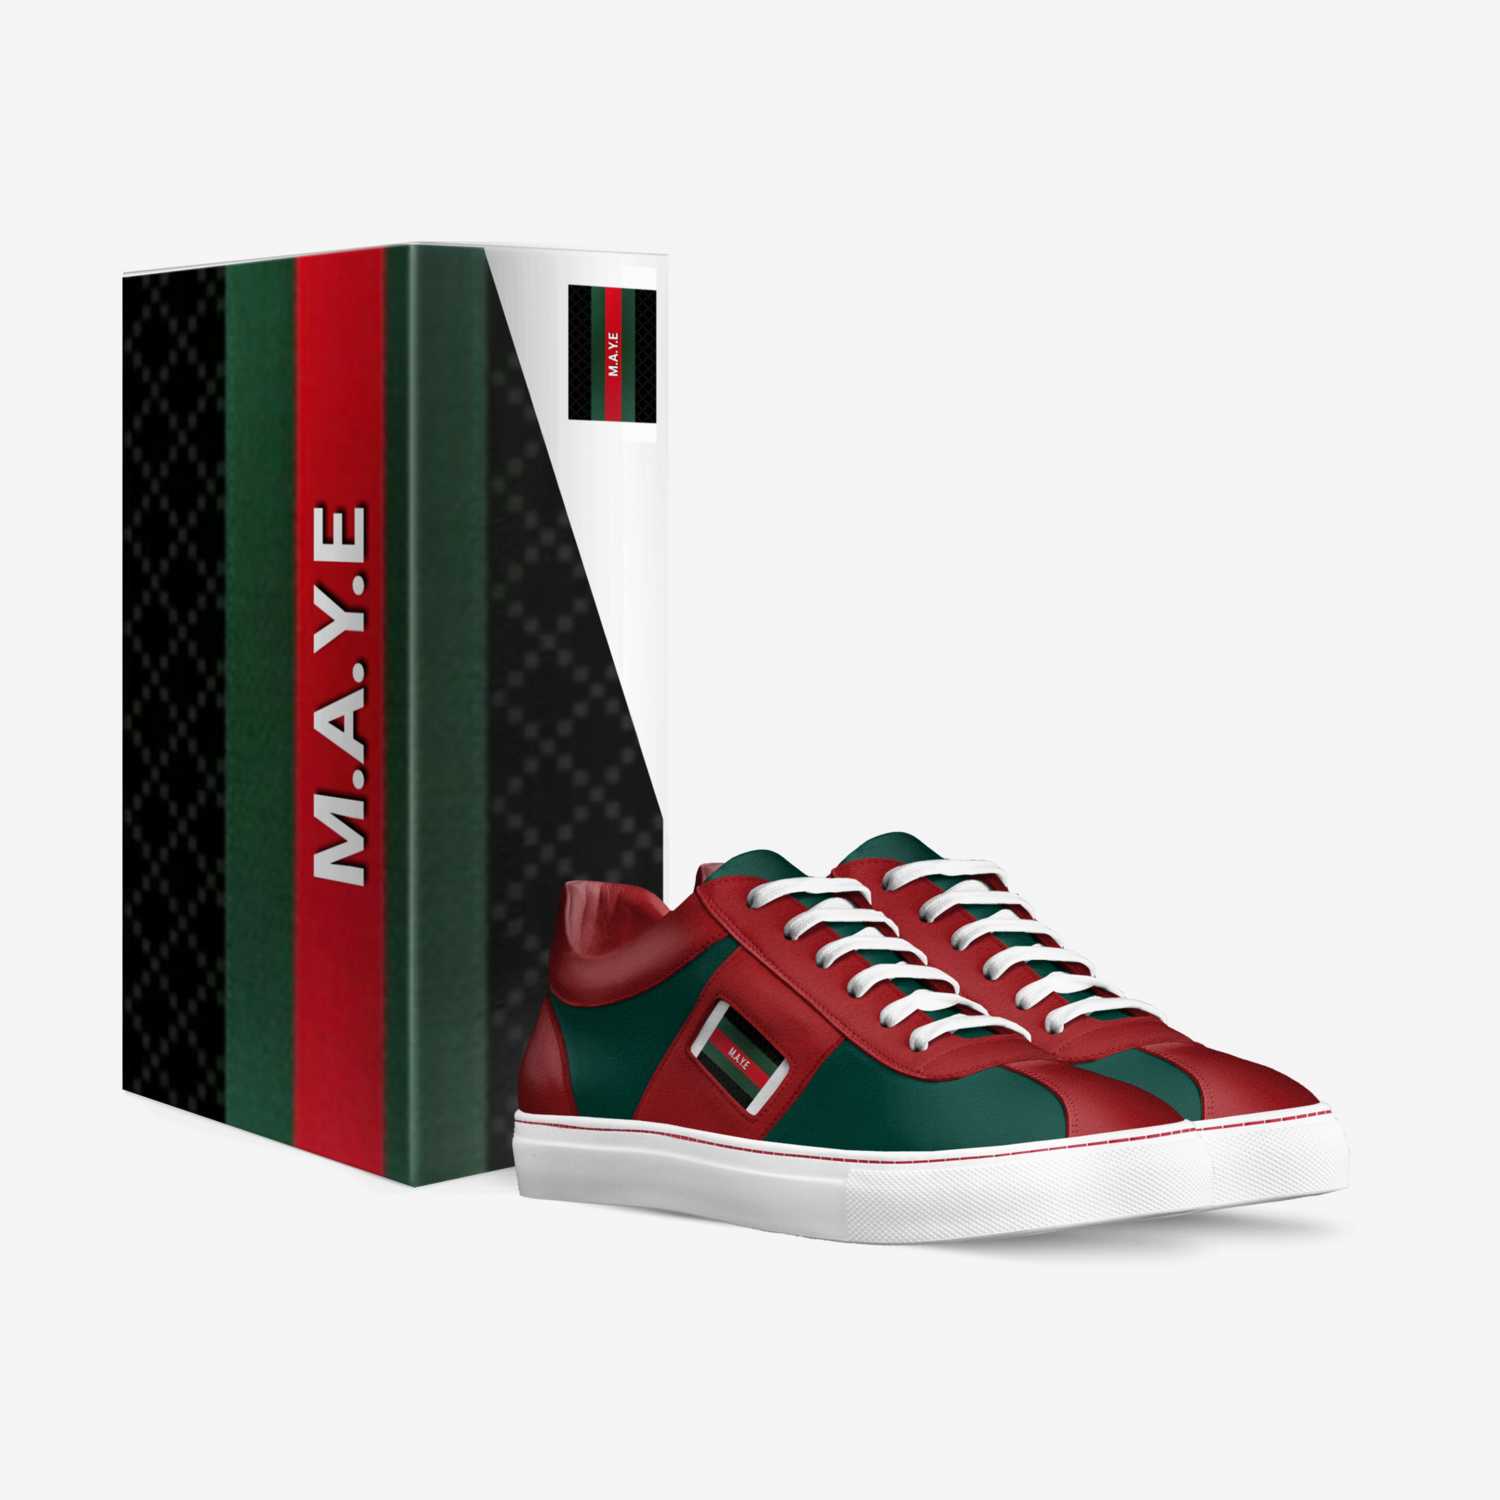 M.A.Y.E custom made in Italy shoes by Mary Goode | Box view